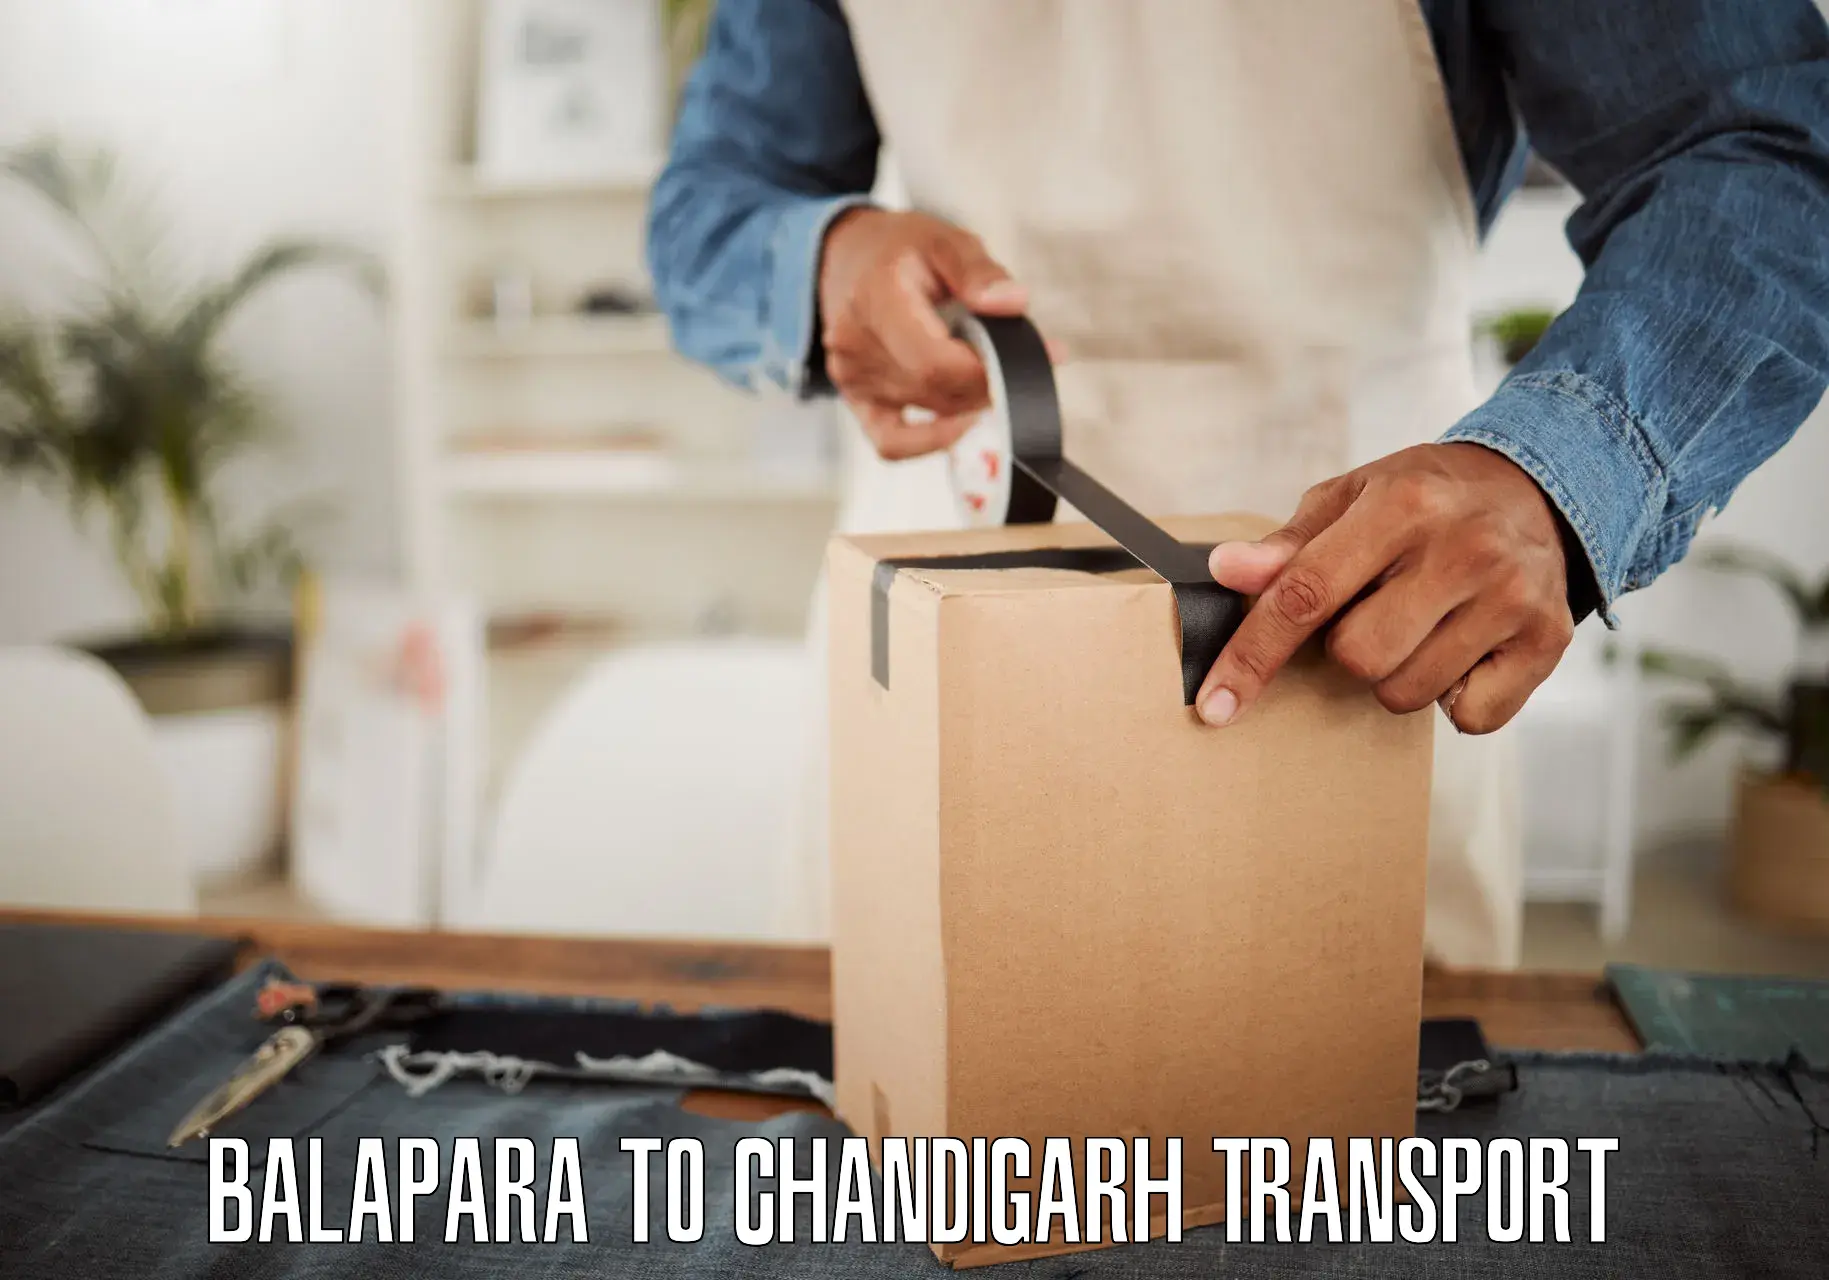 Daily parcel service transport Balapara to Chandigarh